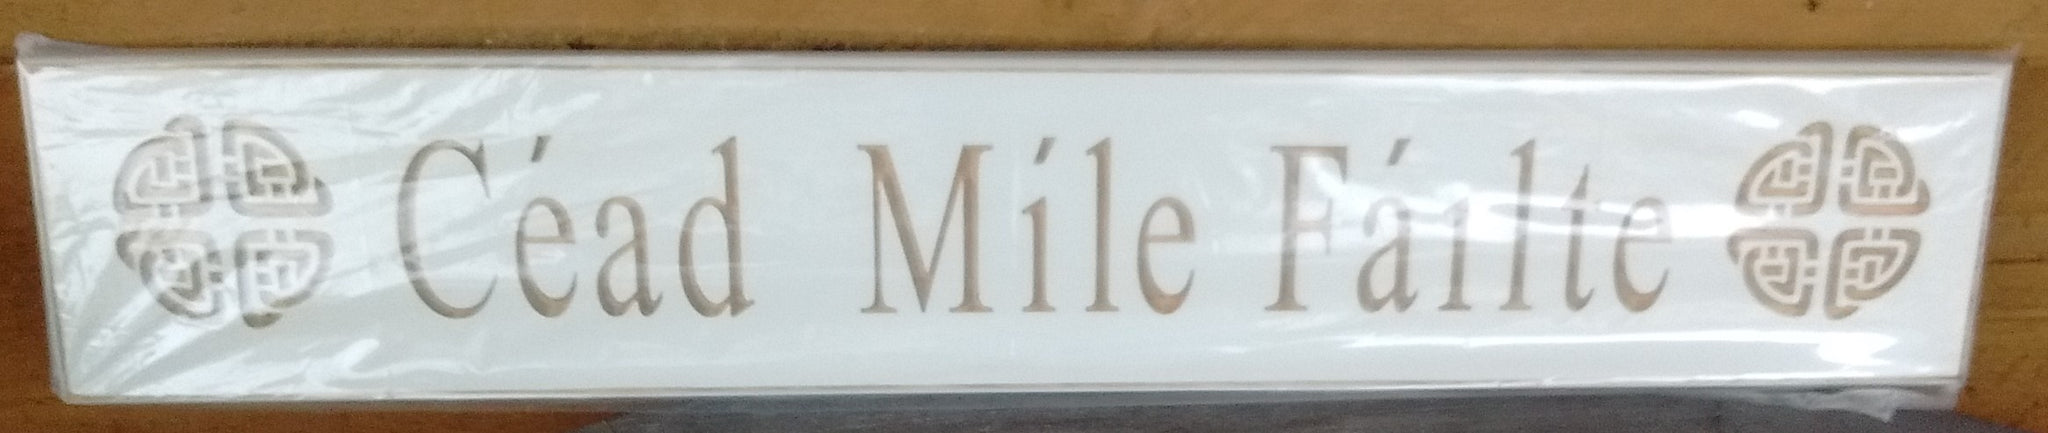 Cead Mile Failte  Wooden Sign - Made in USA 4 Styles in Black or Antique White